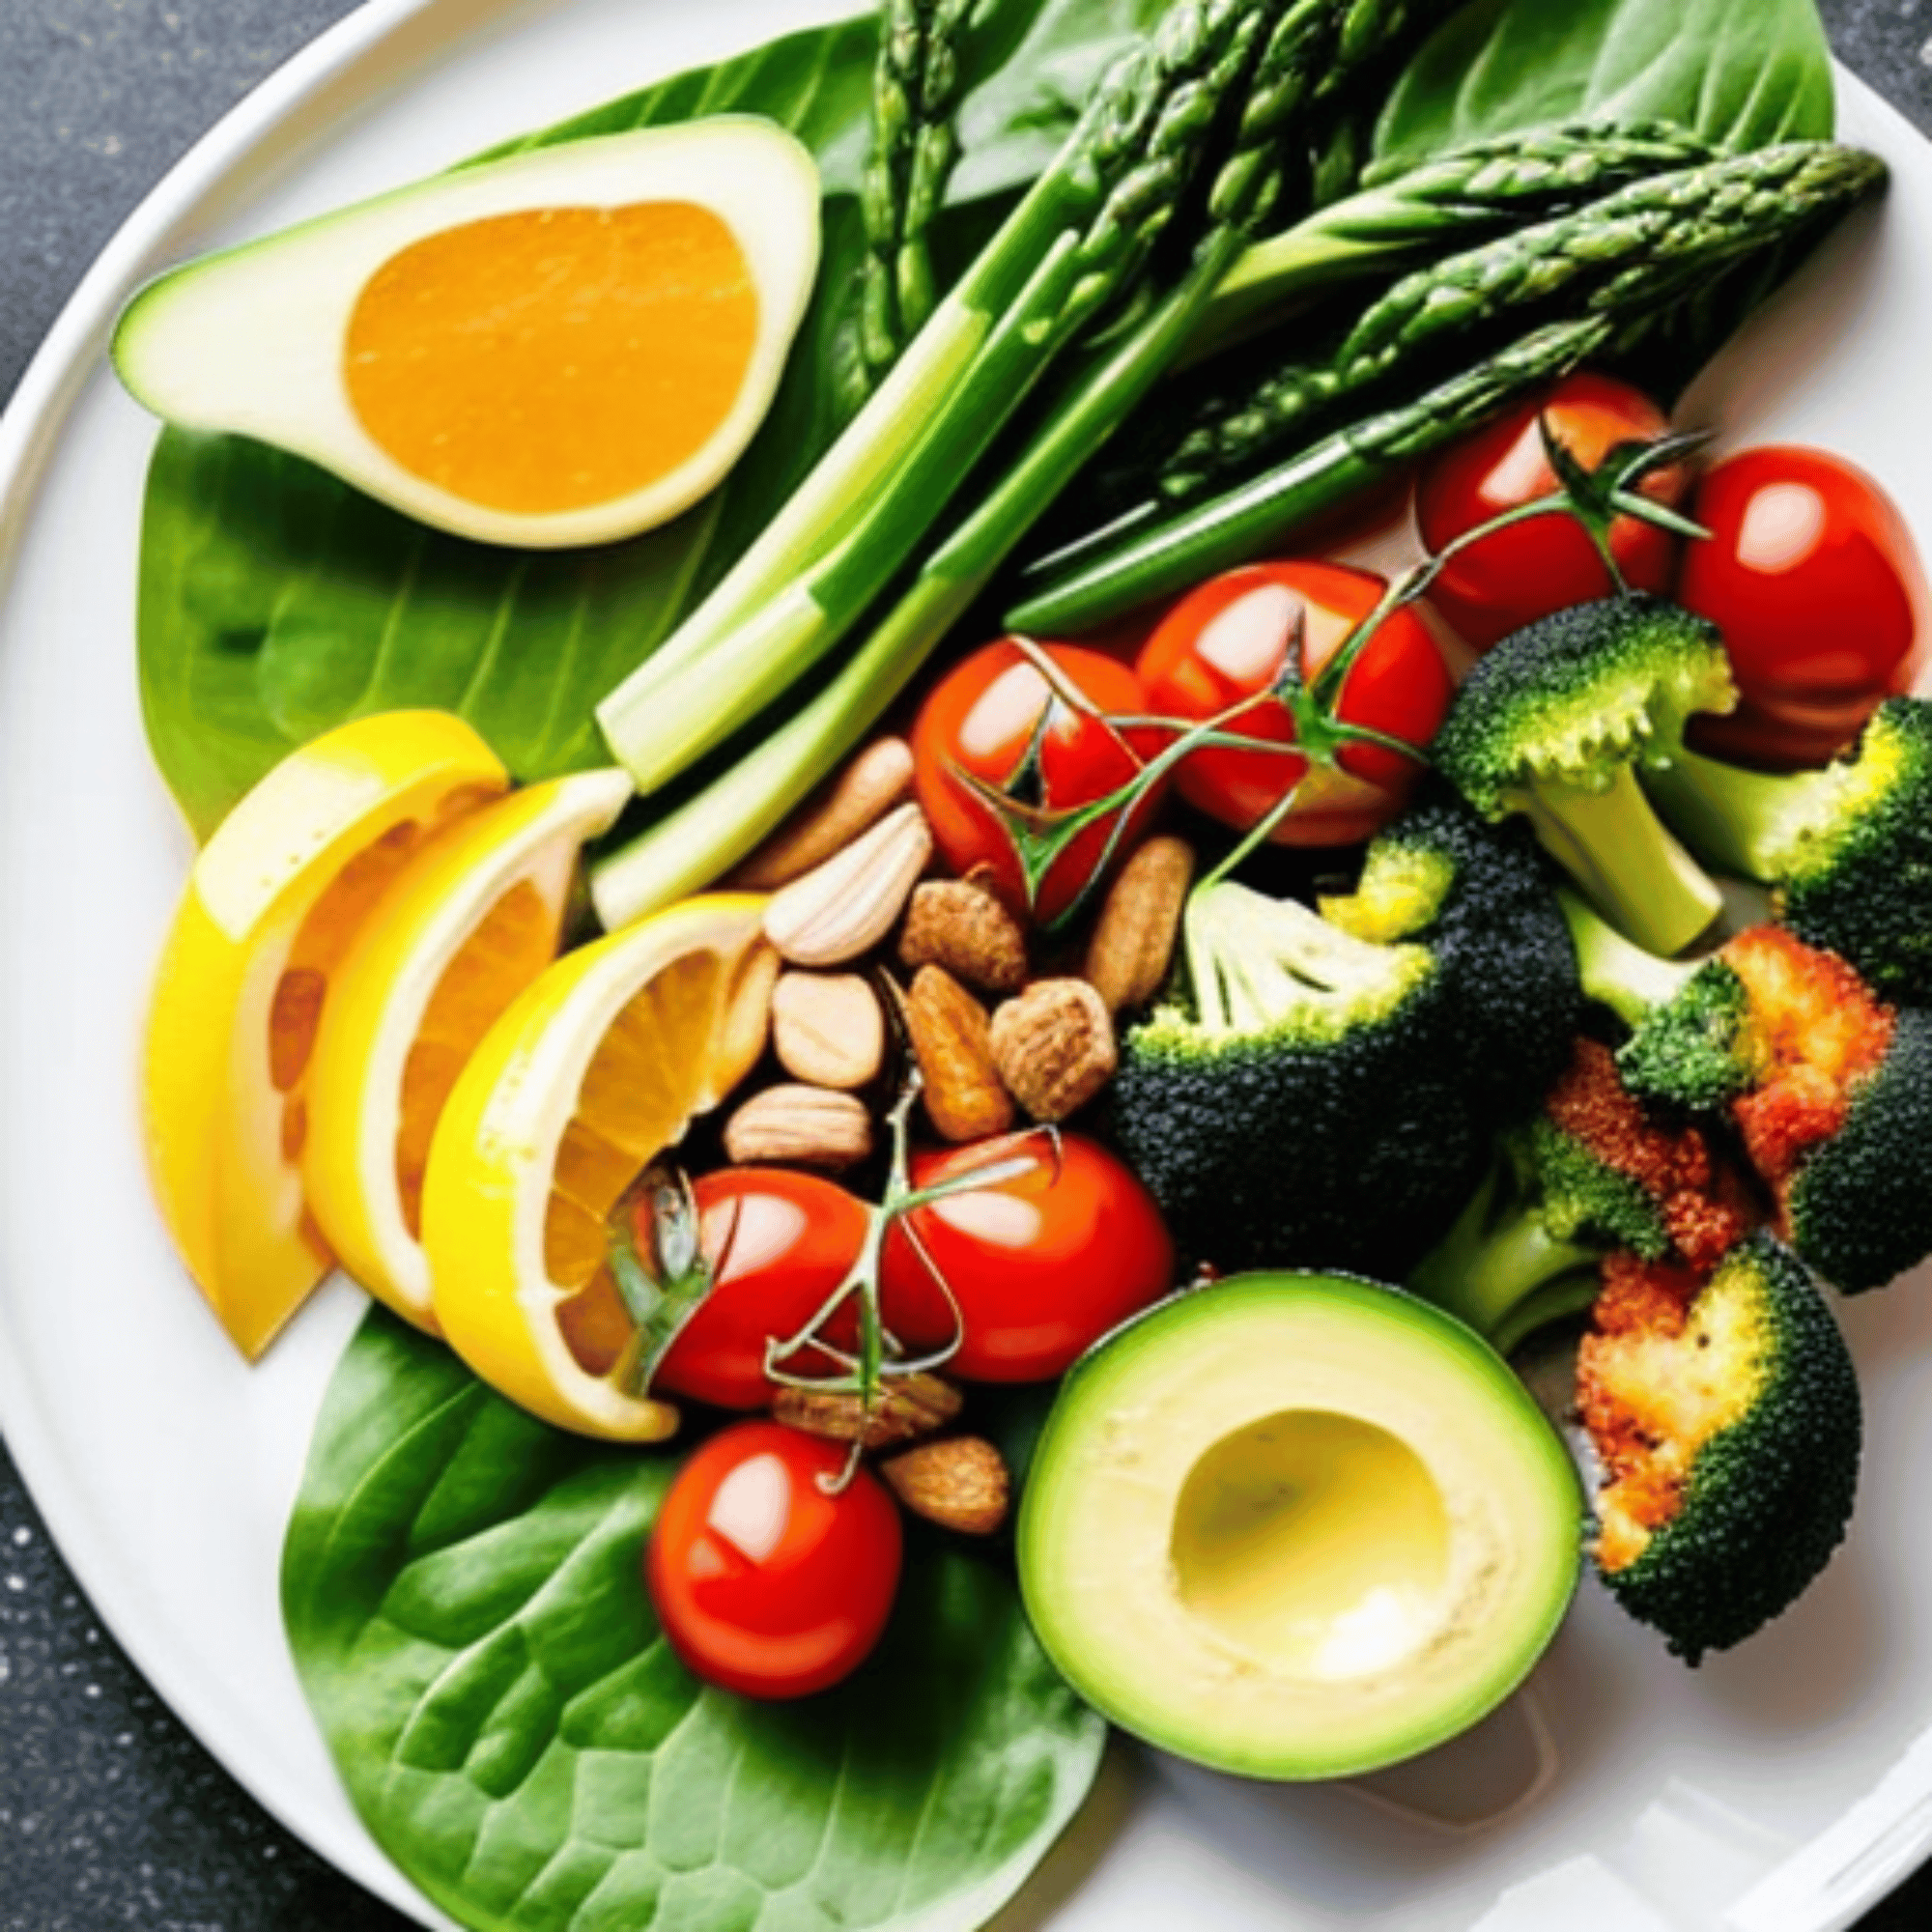 A photo of a plate of fresh, colorful vegan food